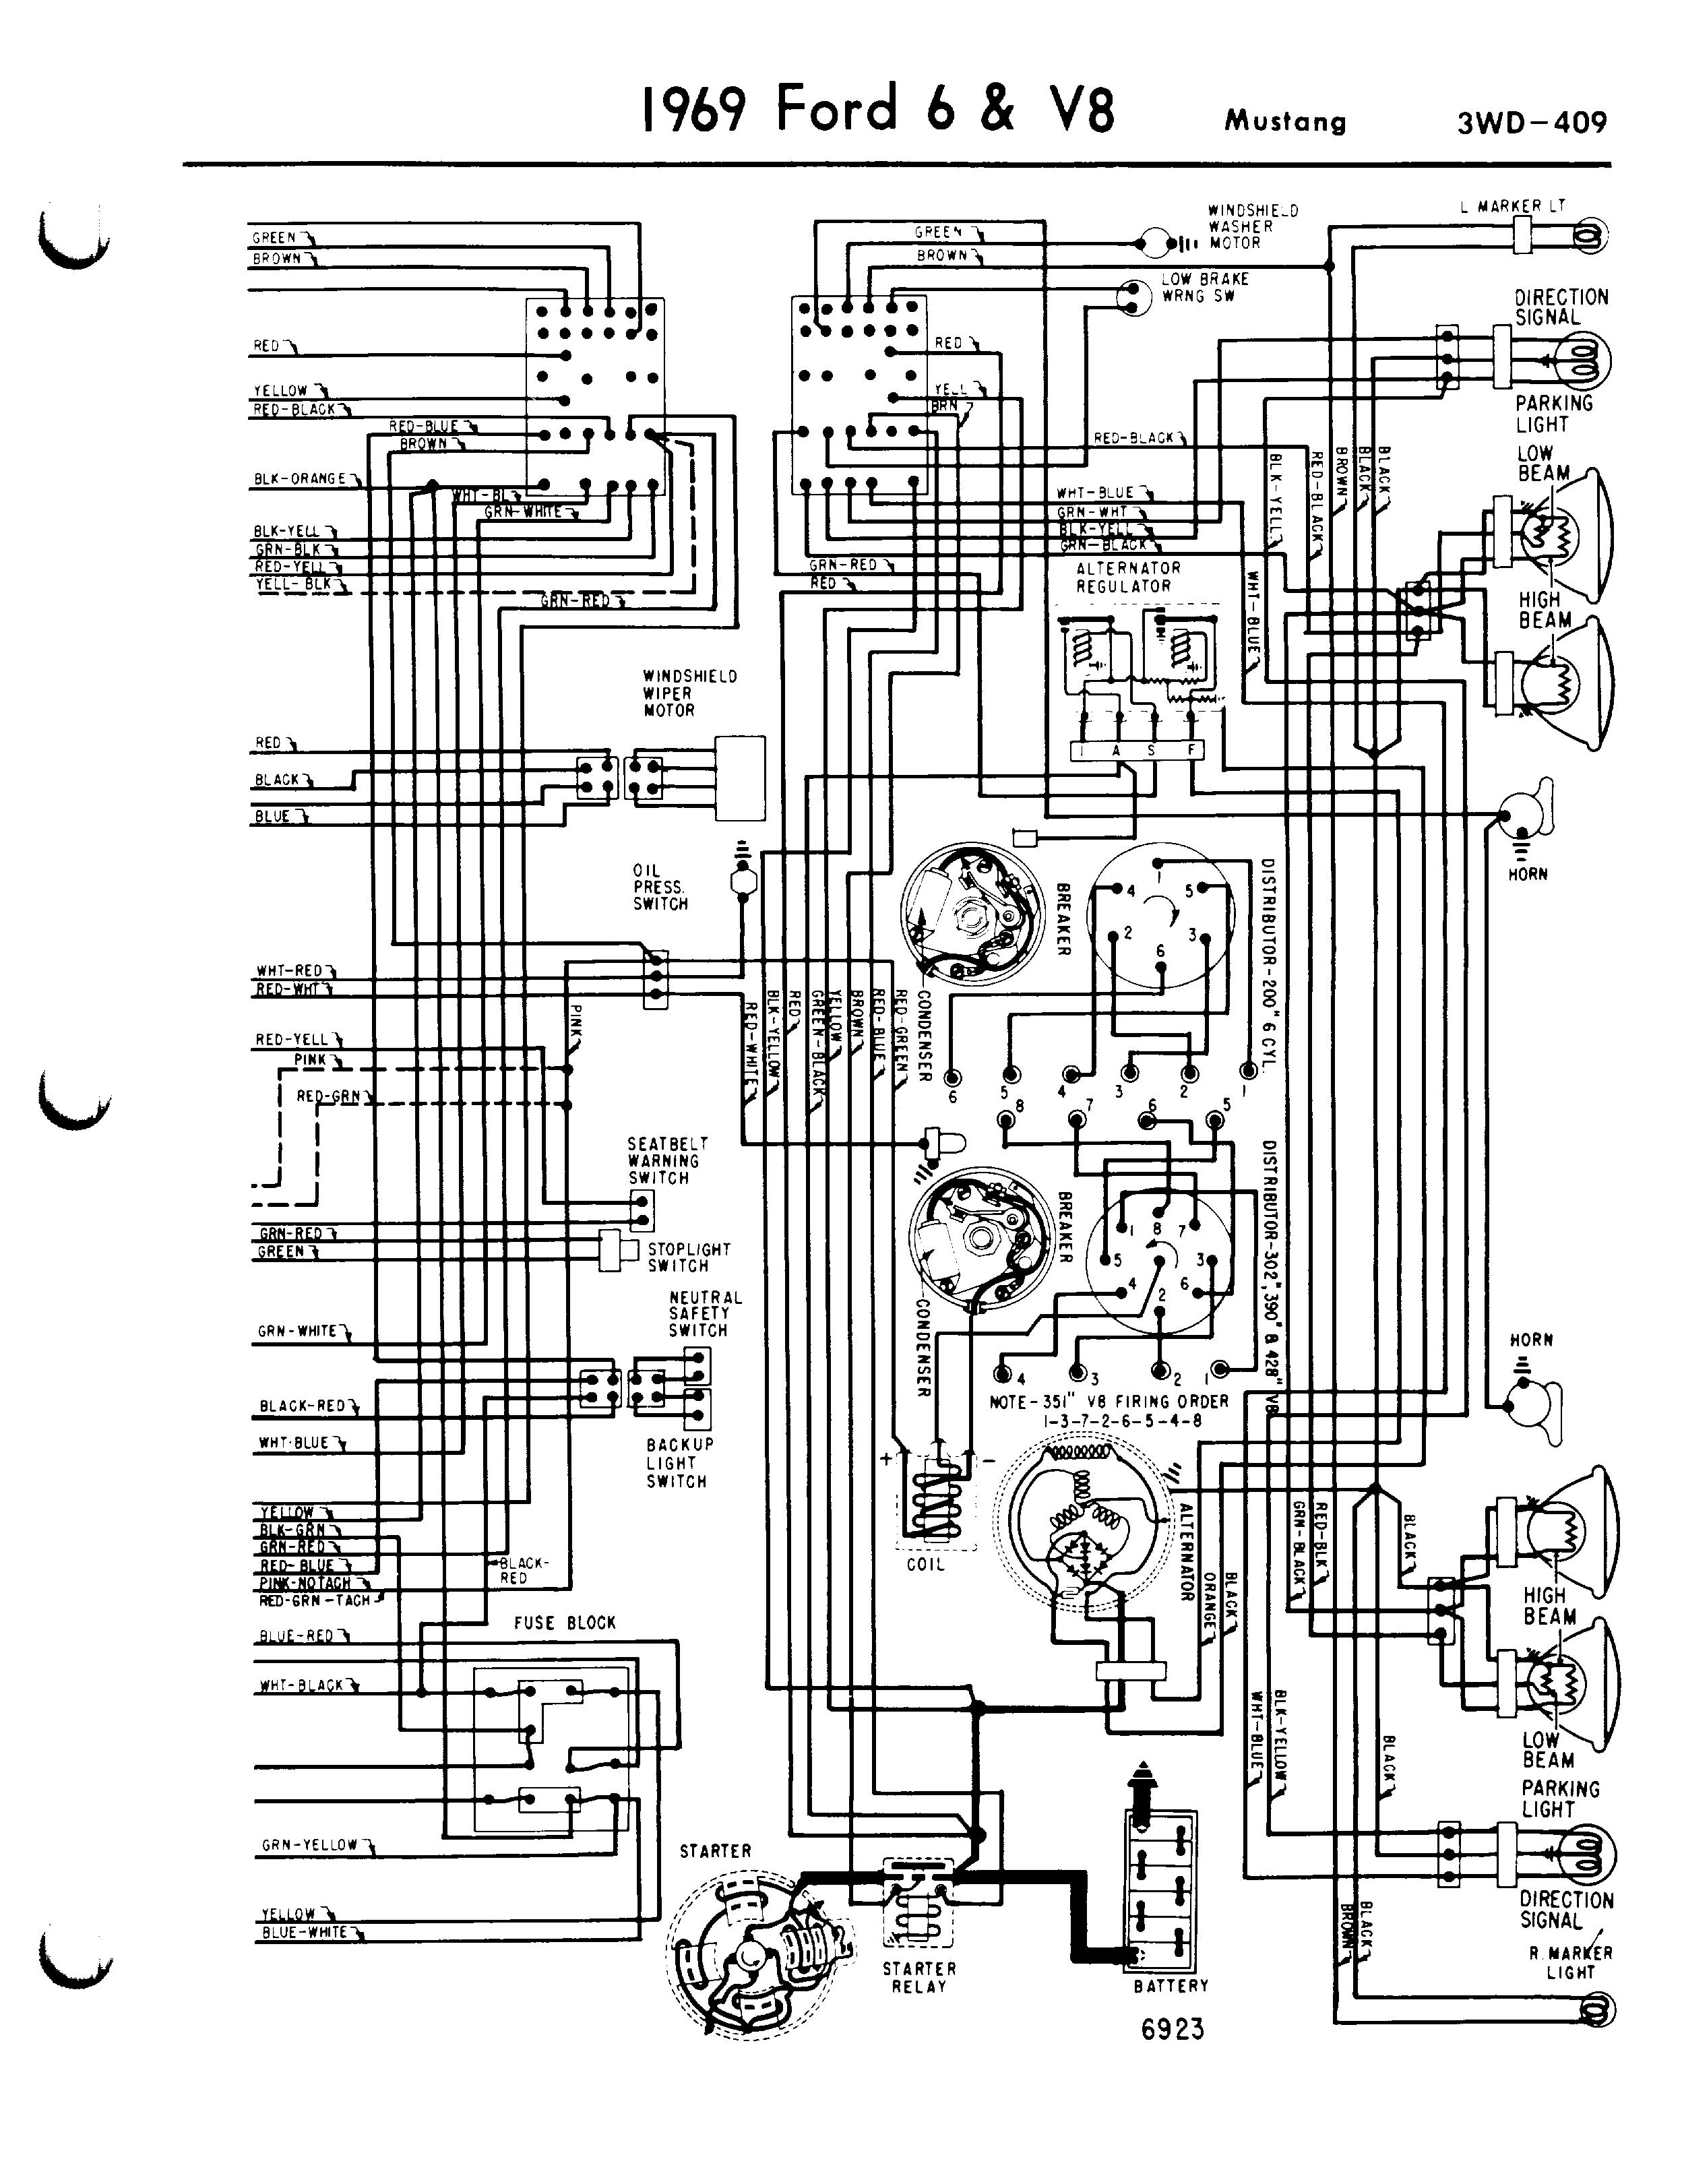 2003 ford focus zx3 ignition wiring diagram